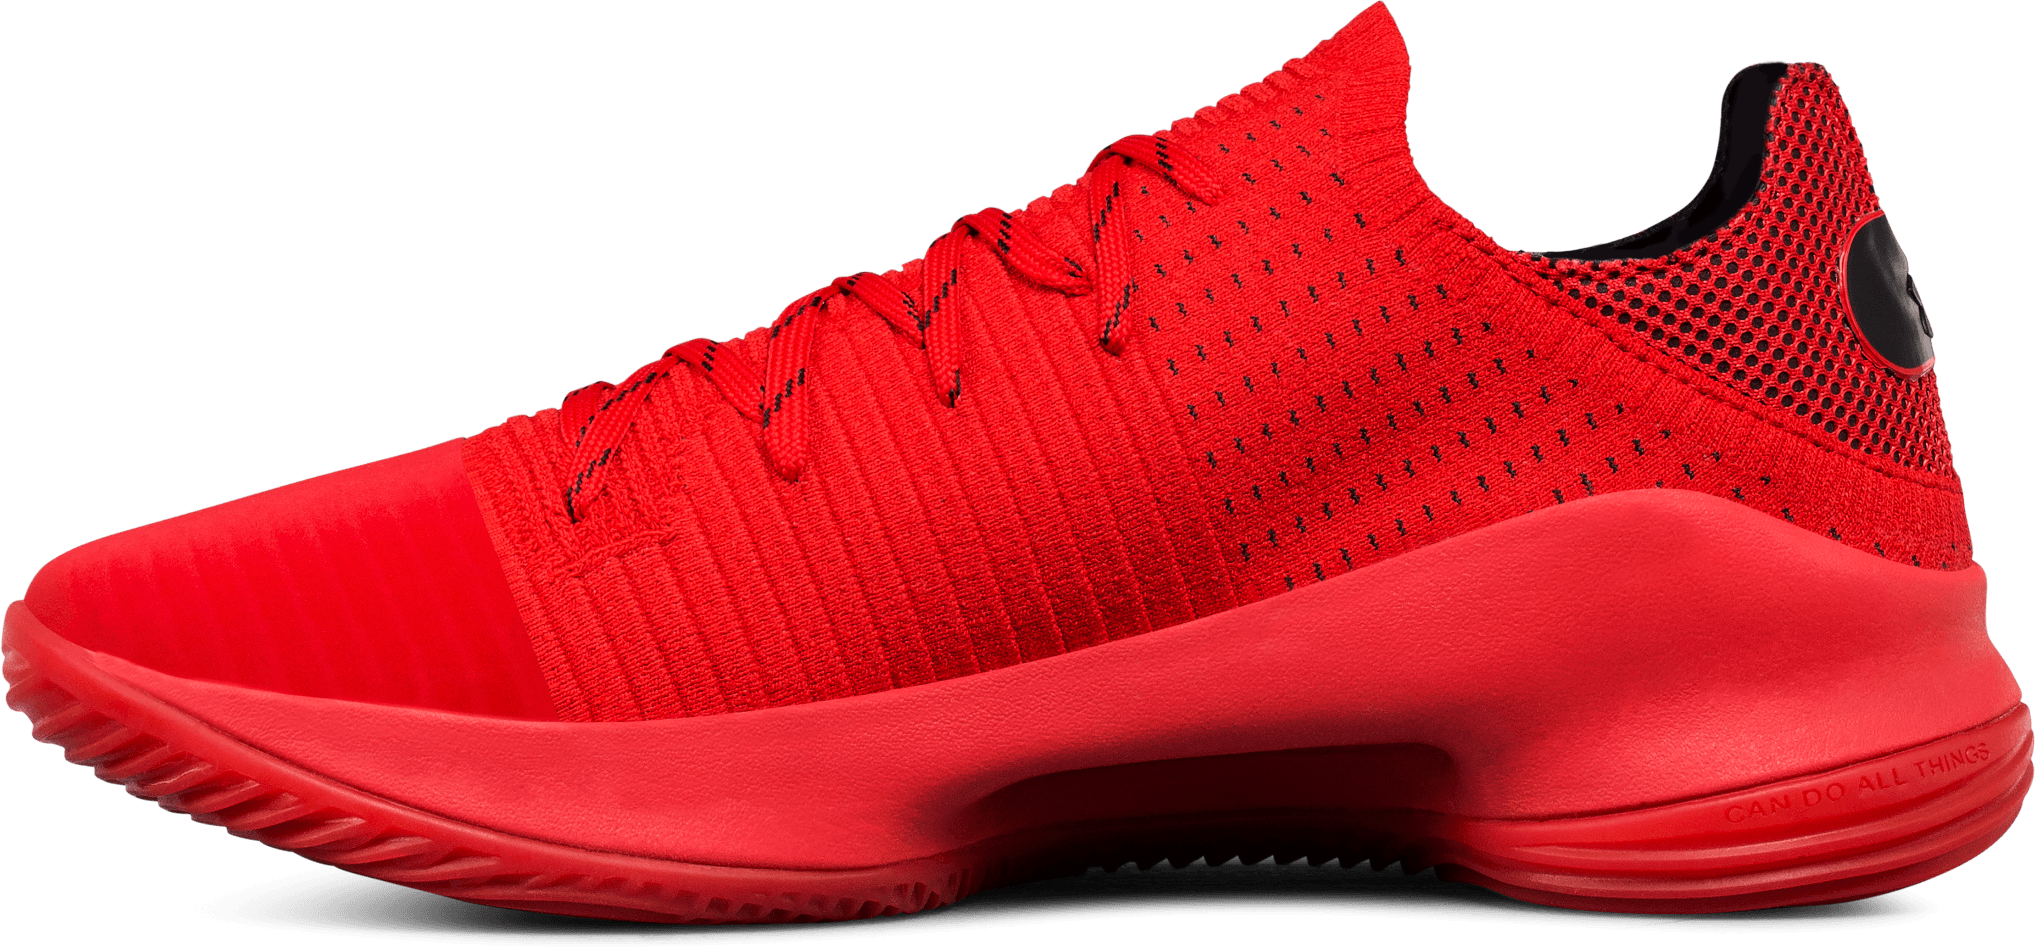 curry 4 red low